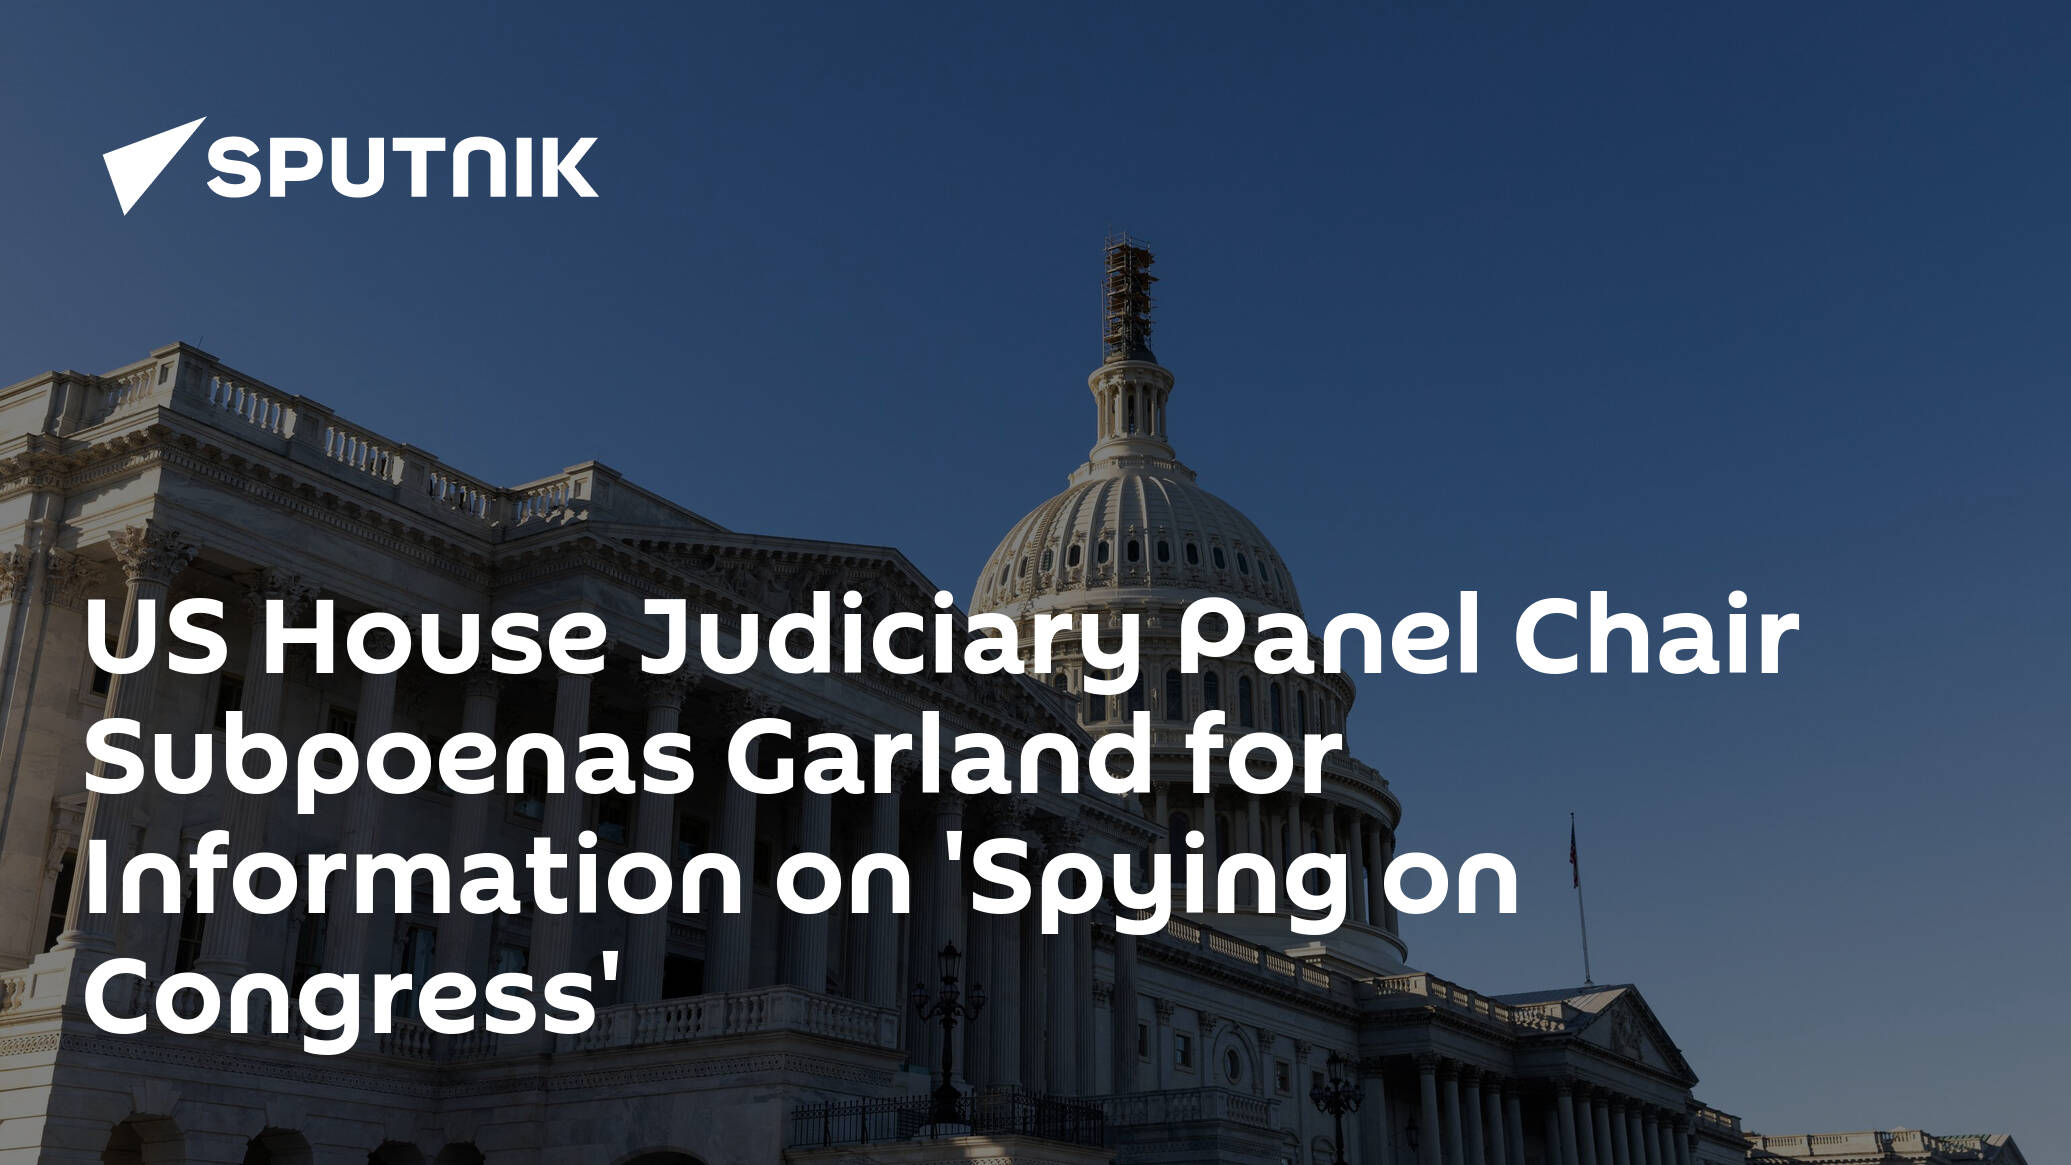 US House Judiciary Panel Chair Subpoenas Garland for Information on 'Spying on Congress'